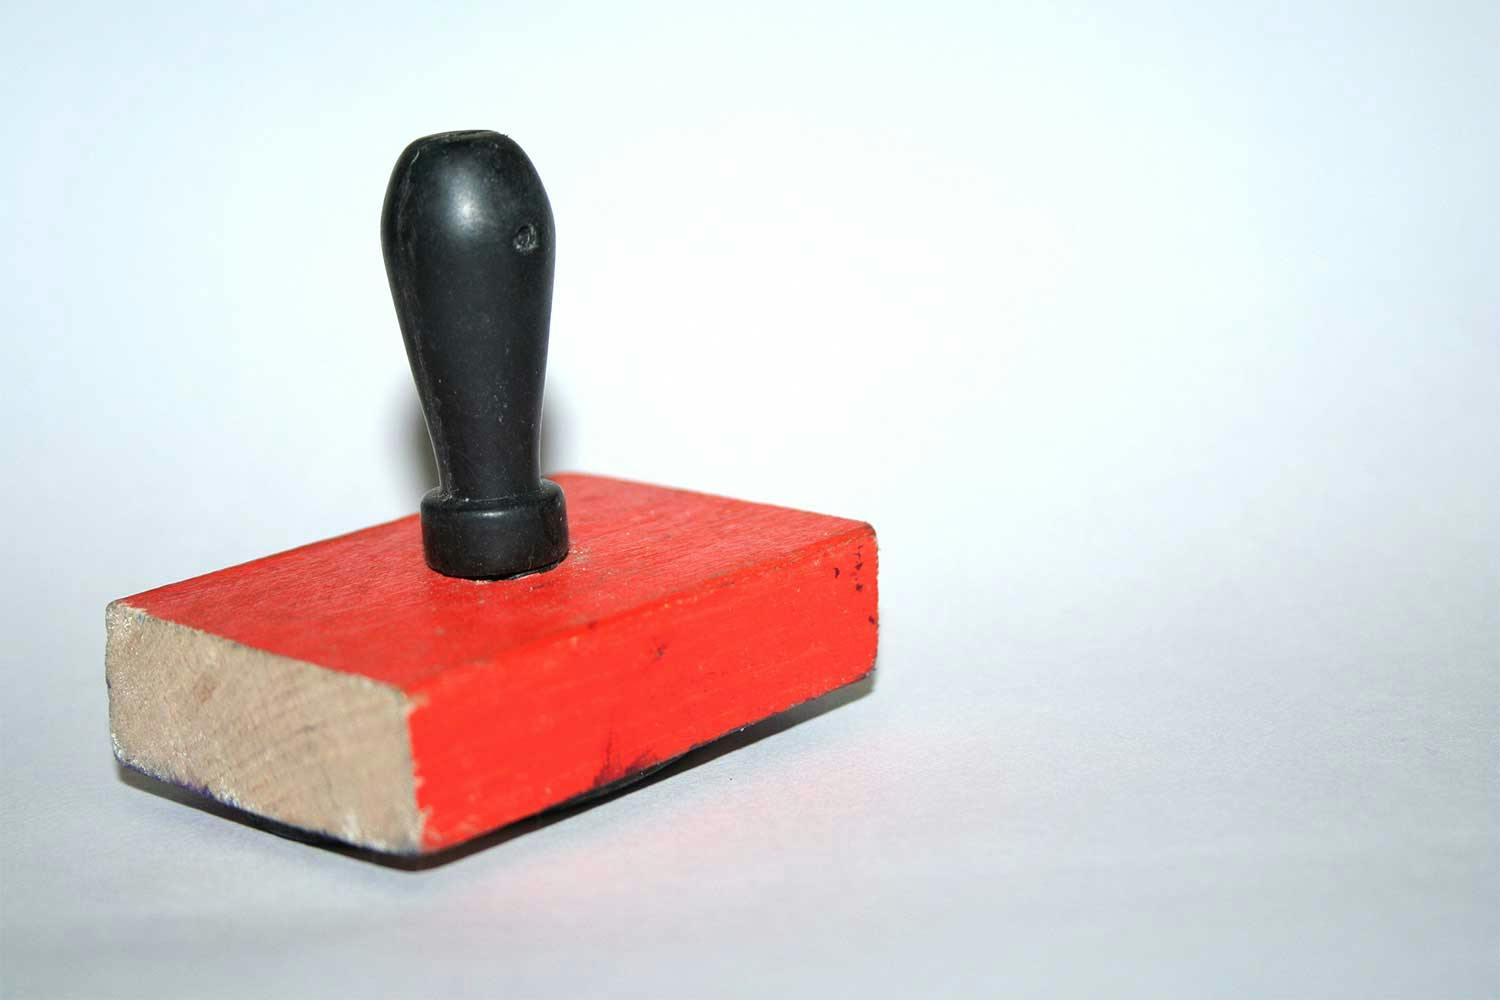 A rubber stamp comprising a wooden block painted red topped with a bulbous black handle.